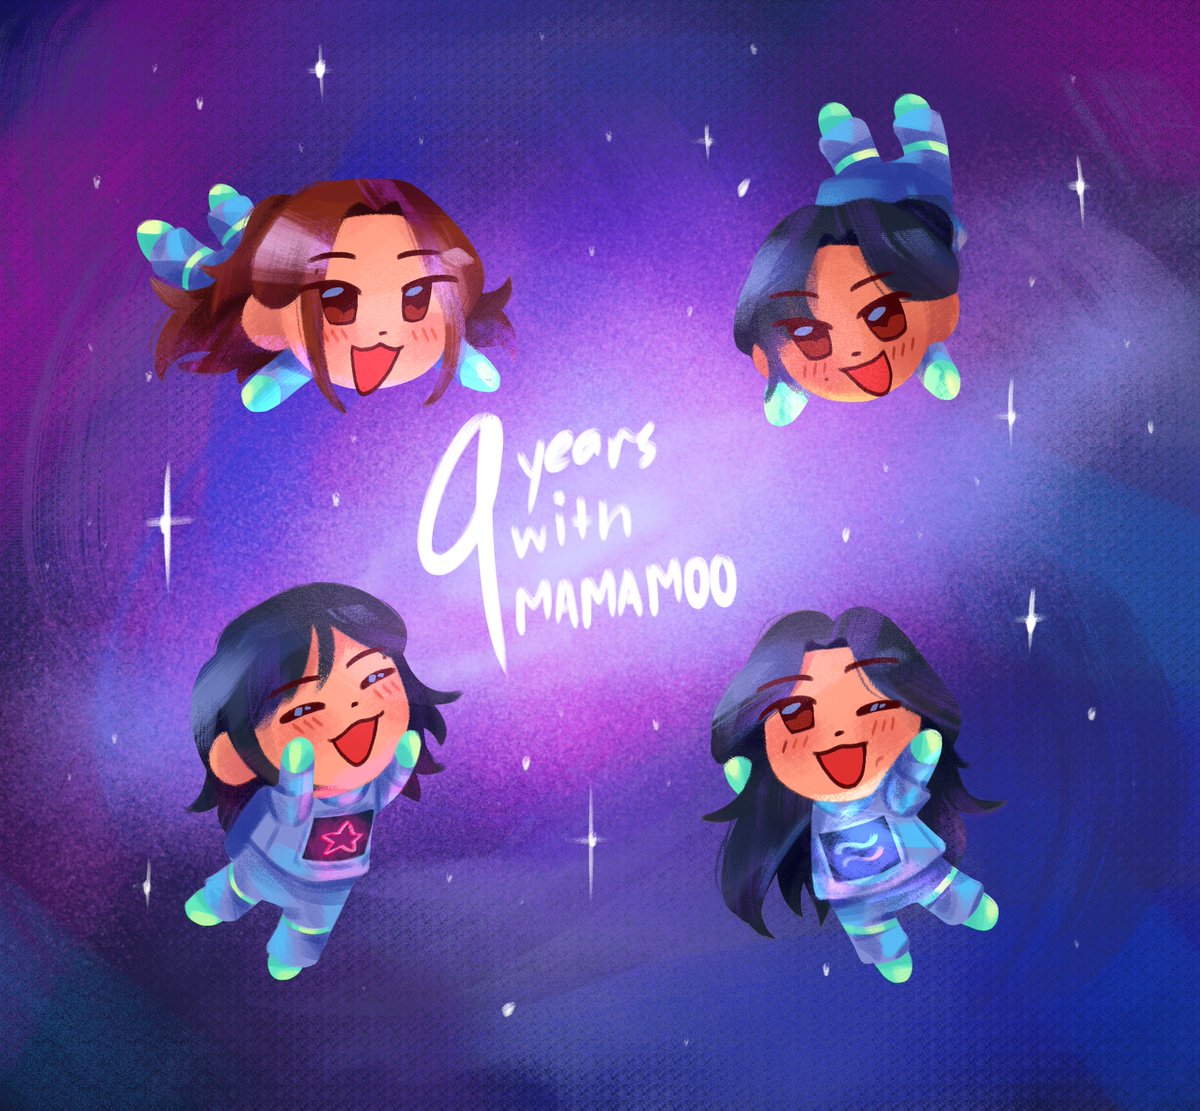 'In every universe, we'll find each other.'

#9yrswithMamamoo
#MooMoosWillContinue 
 #무무들은계속된다